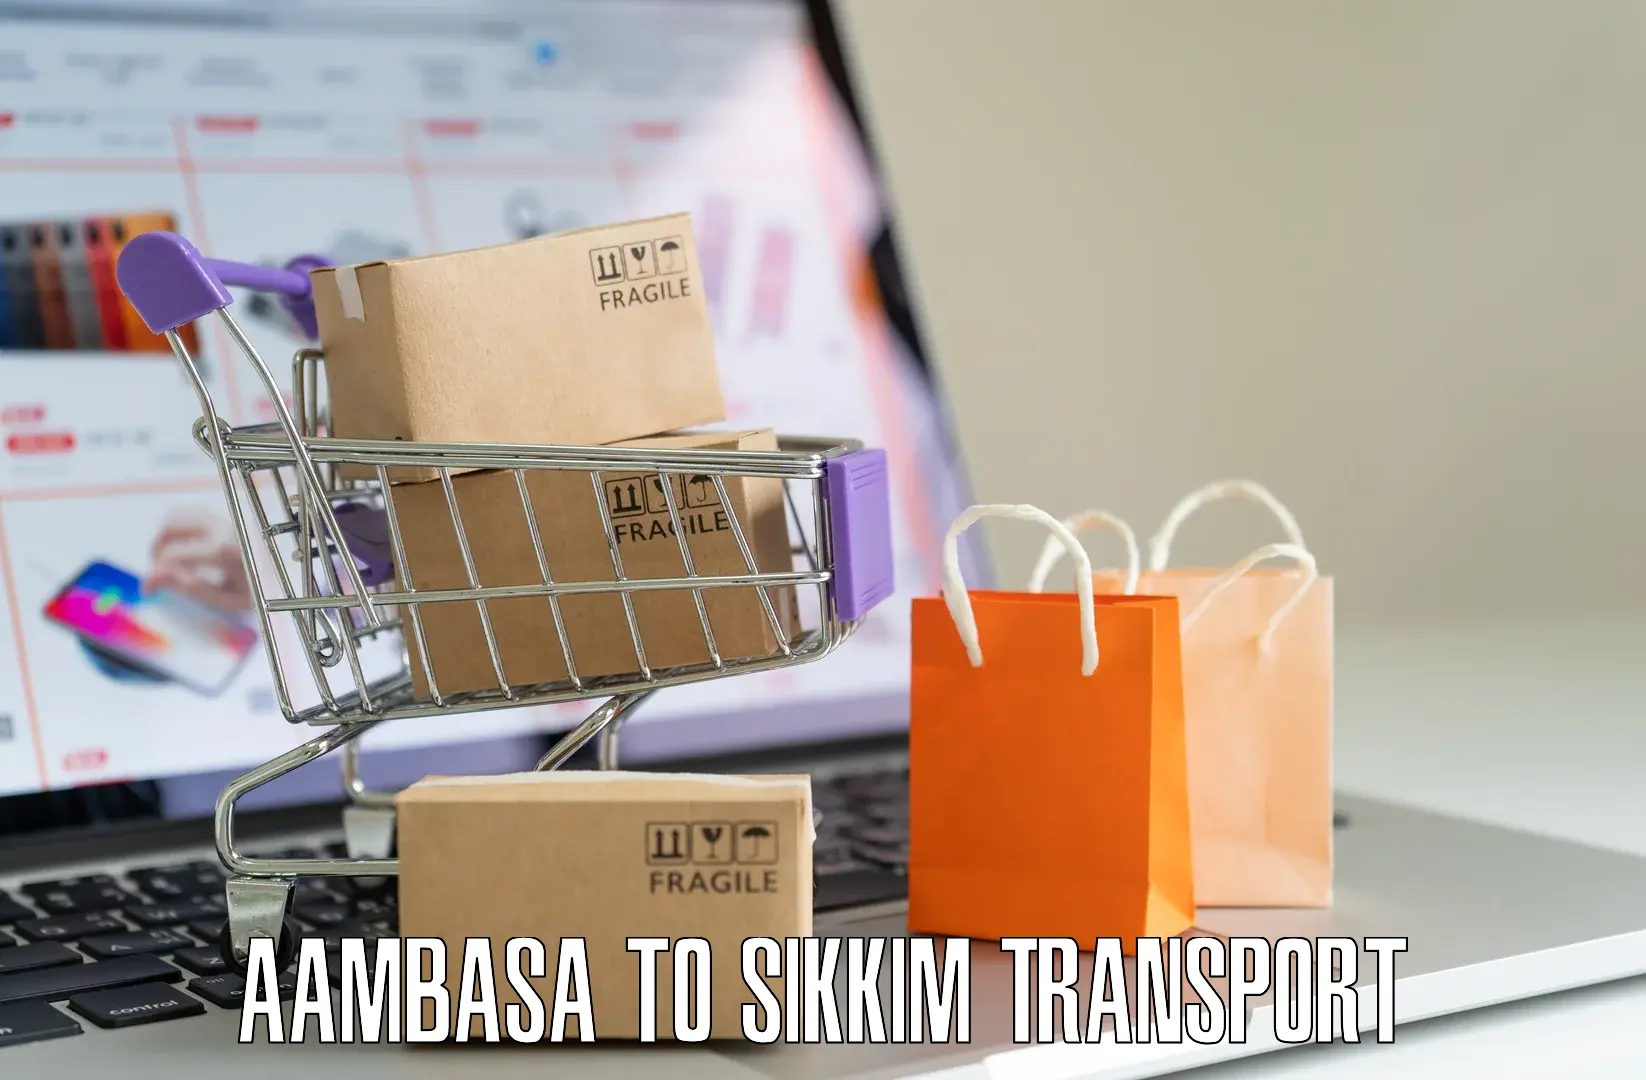 Domestic transport services Aambasa to Pelling